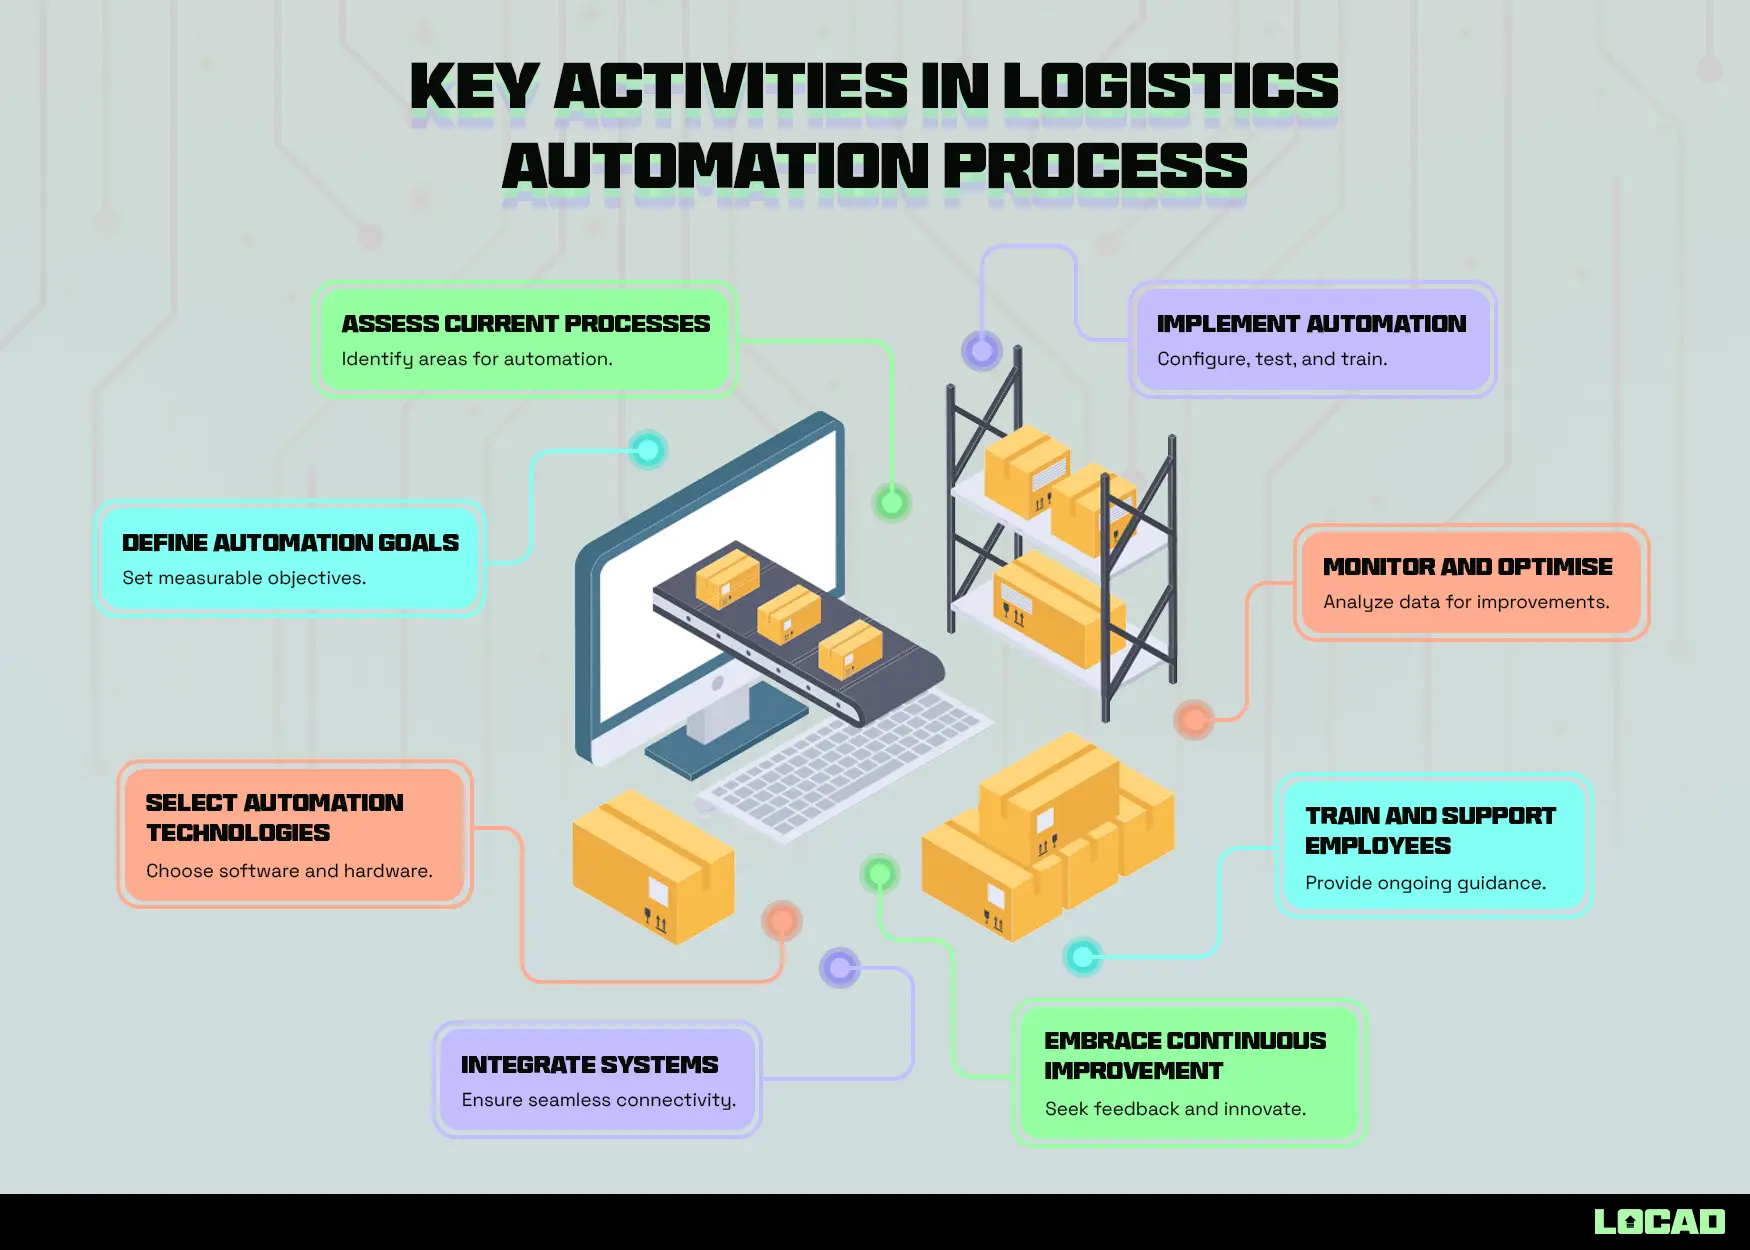 Key Activities in Logistics Automation Process